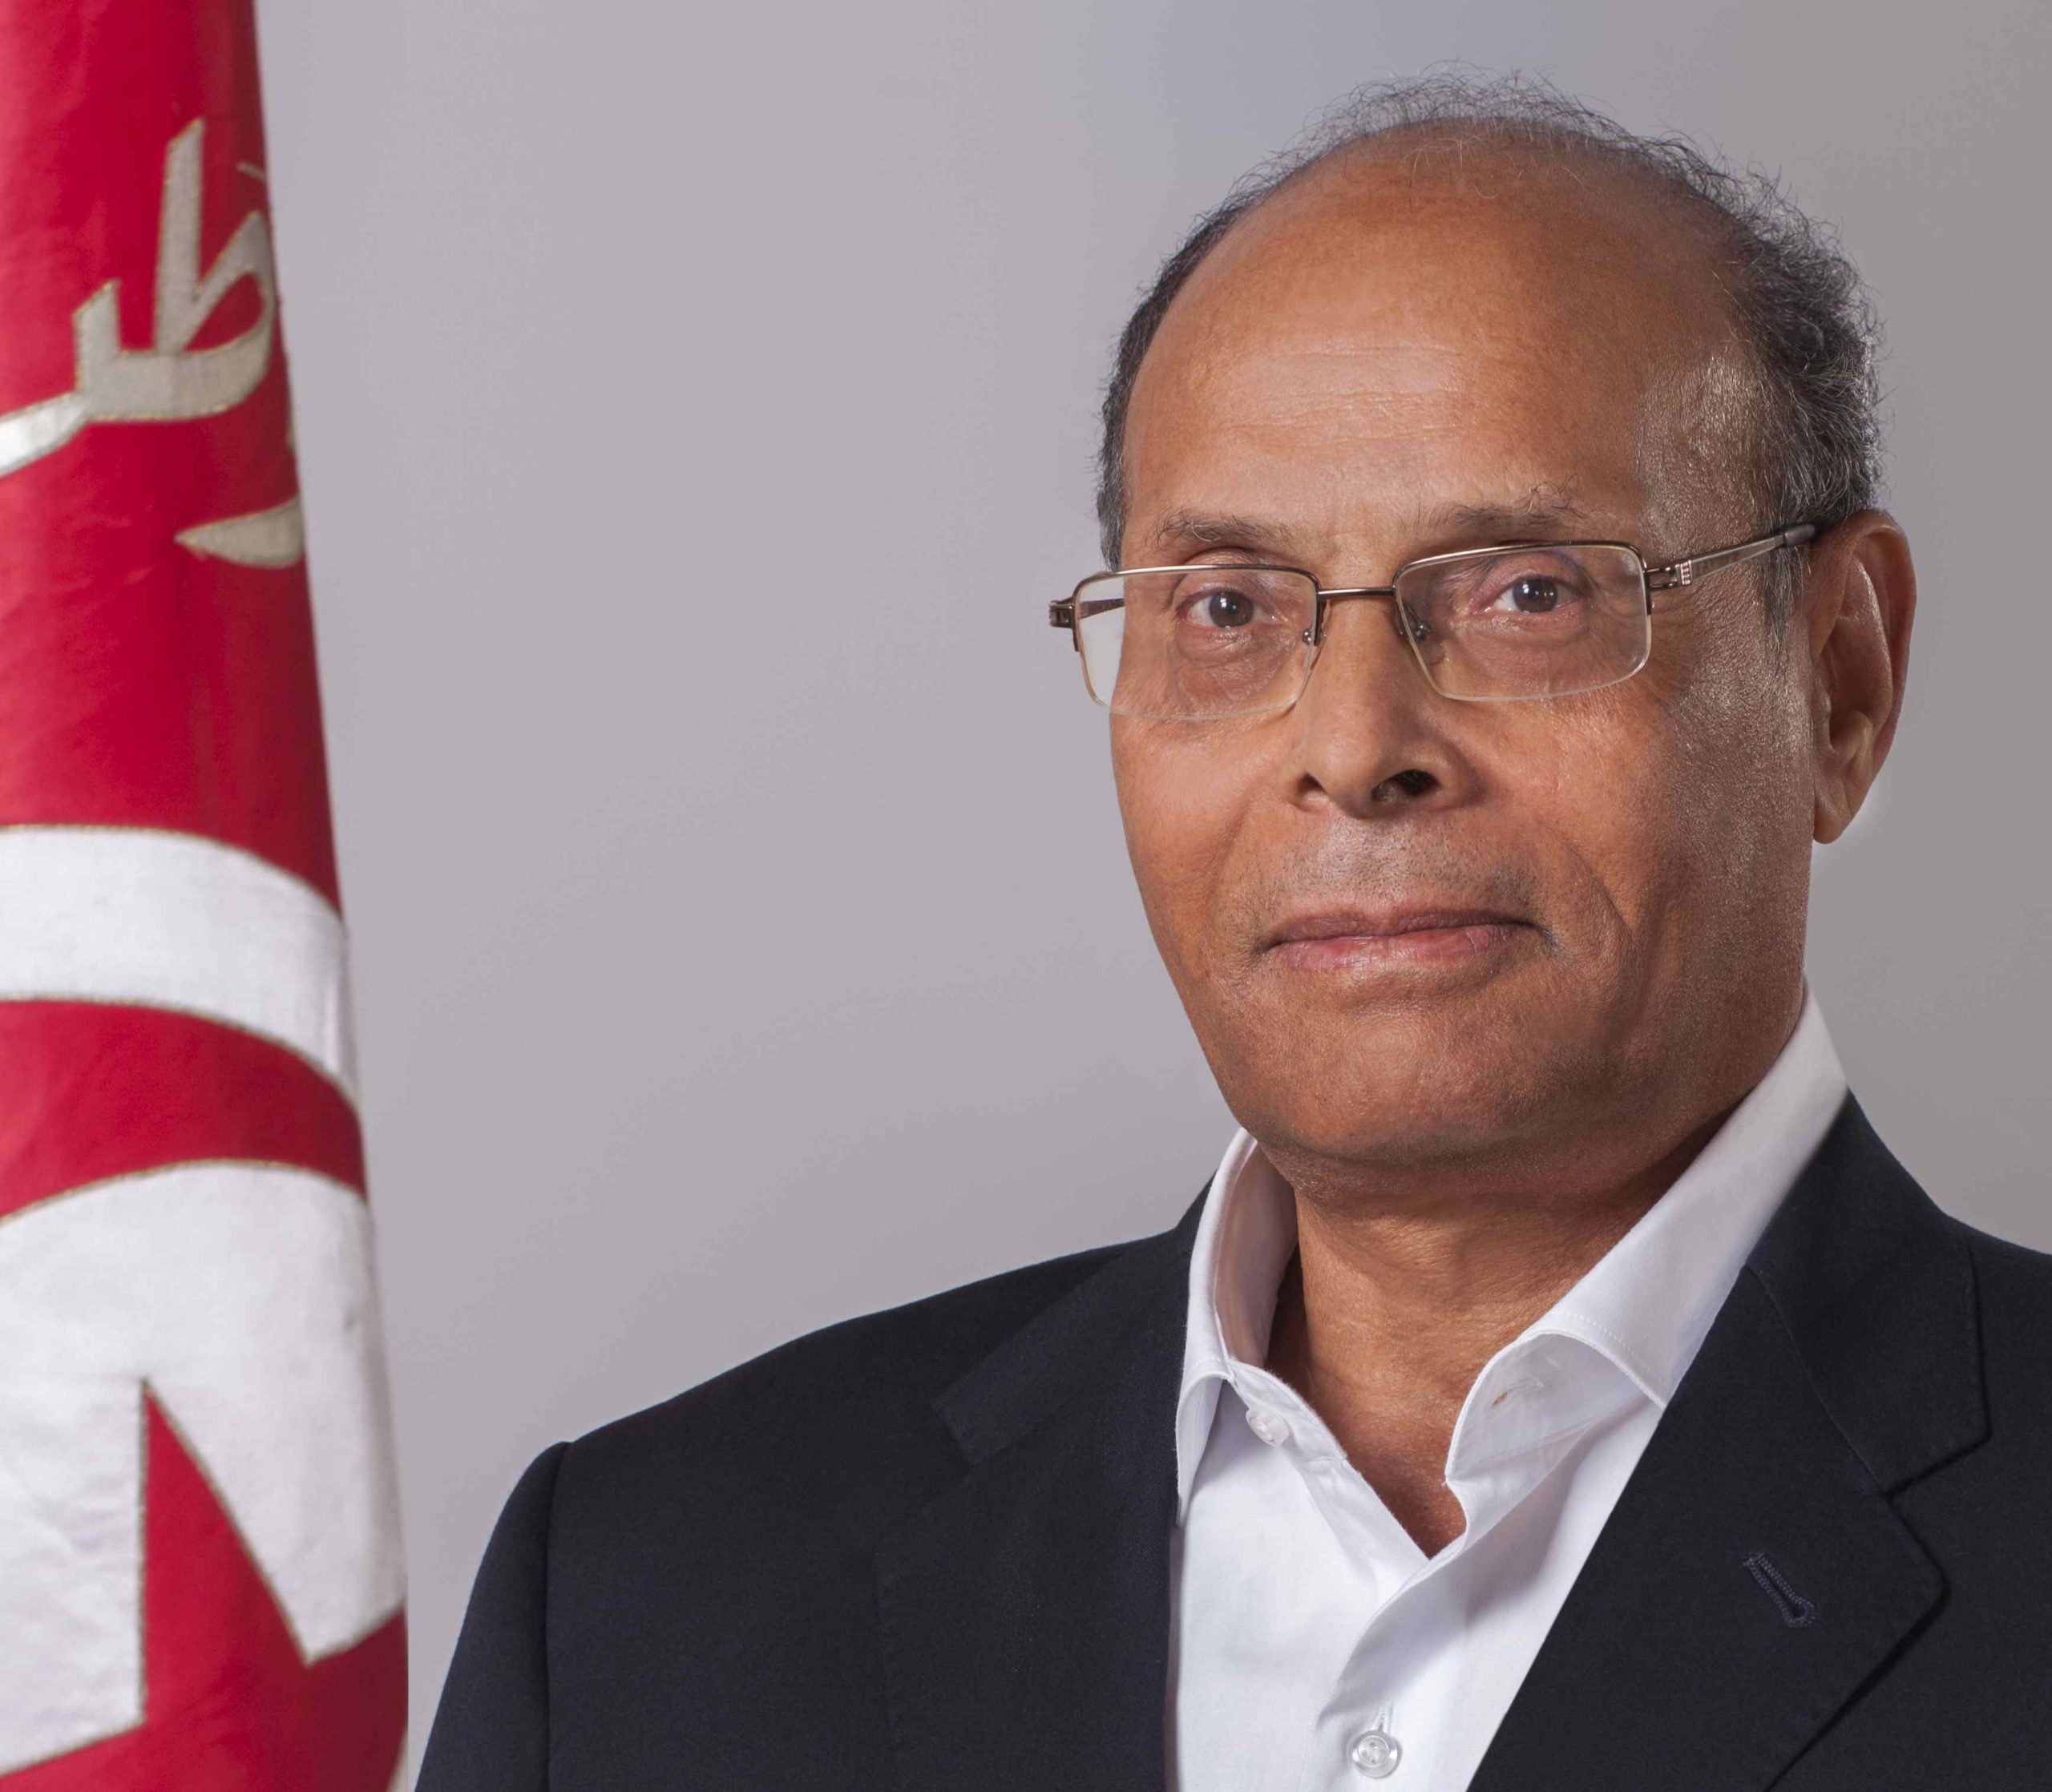 photo Dr. Mohamed Moncef Marzouki